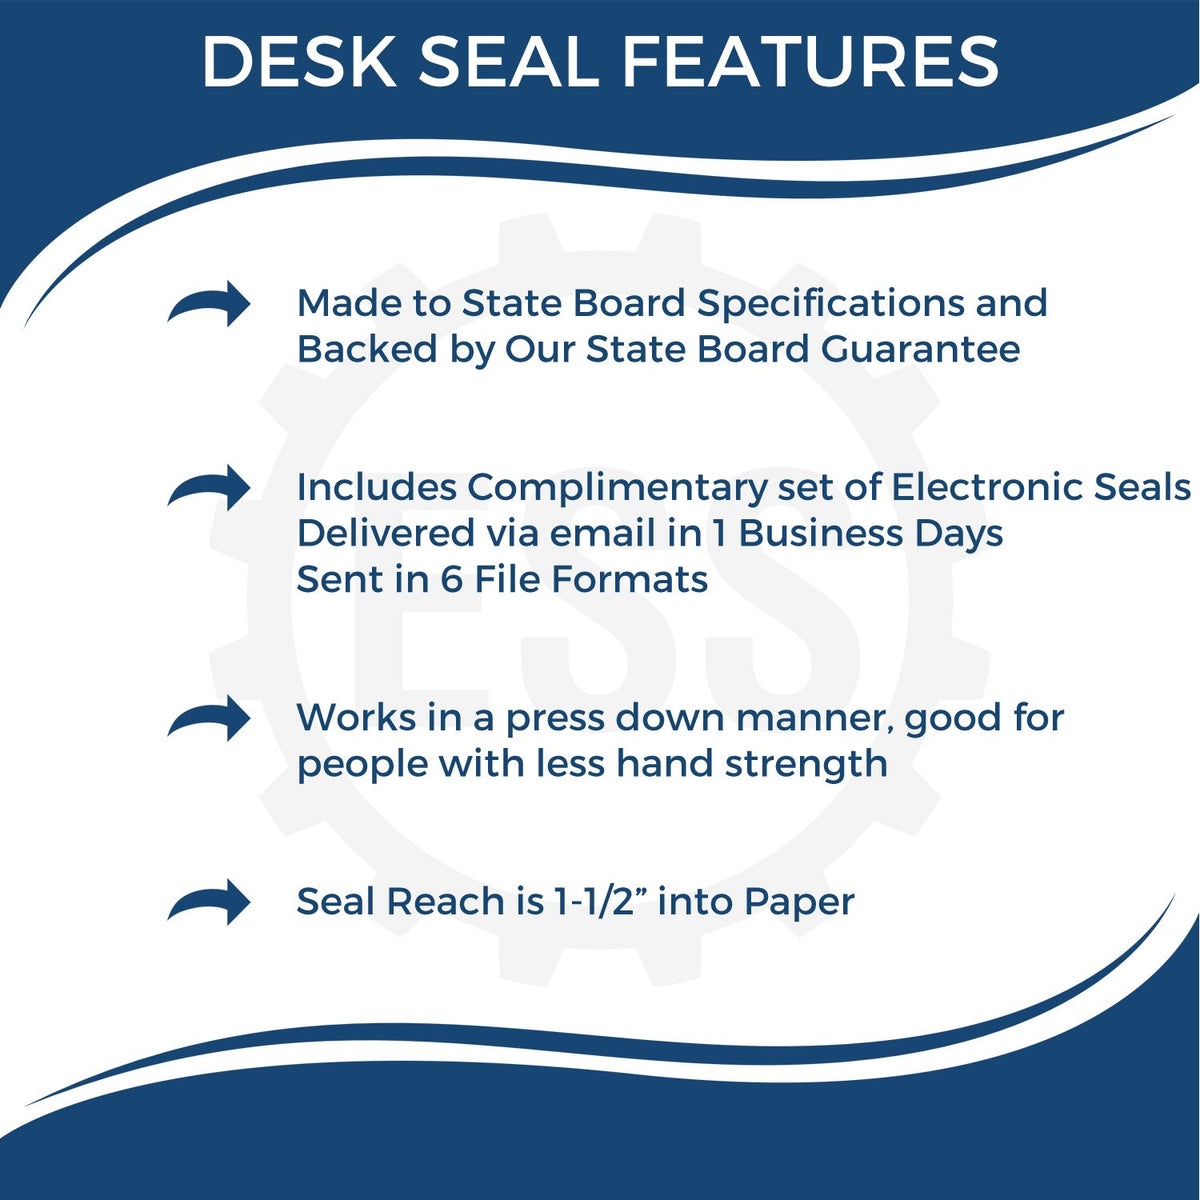 A picture of an infographic highlighting the selling points for the Hawaii Engineer Desk Seal